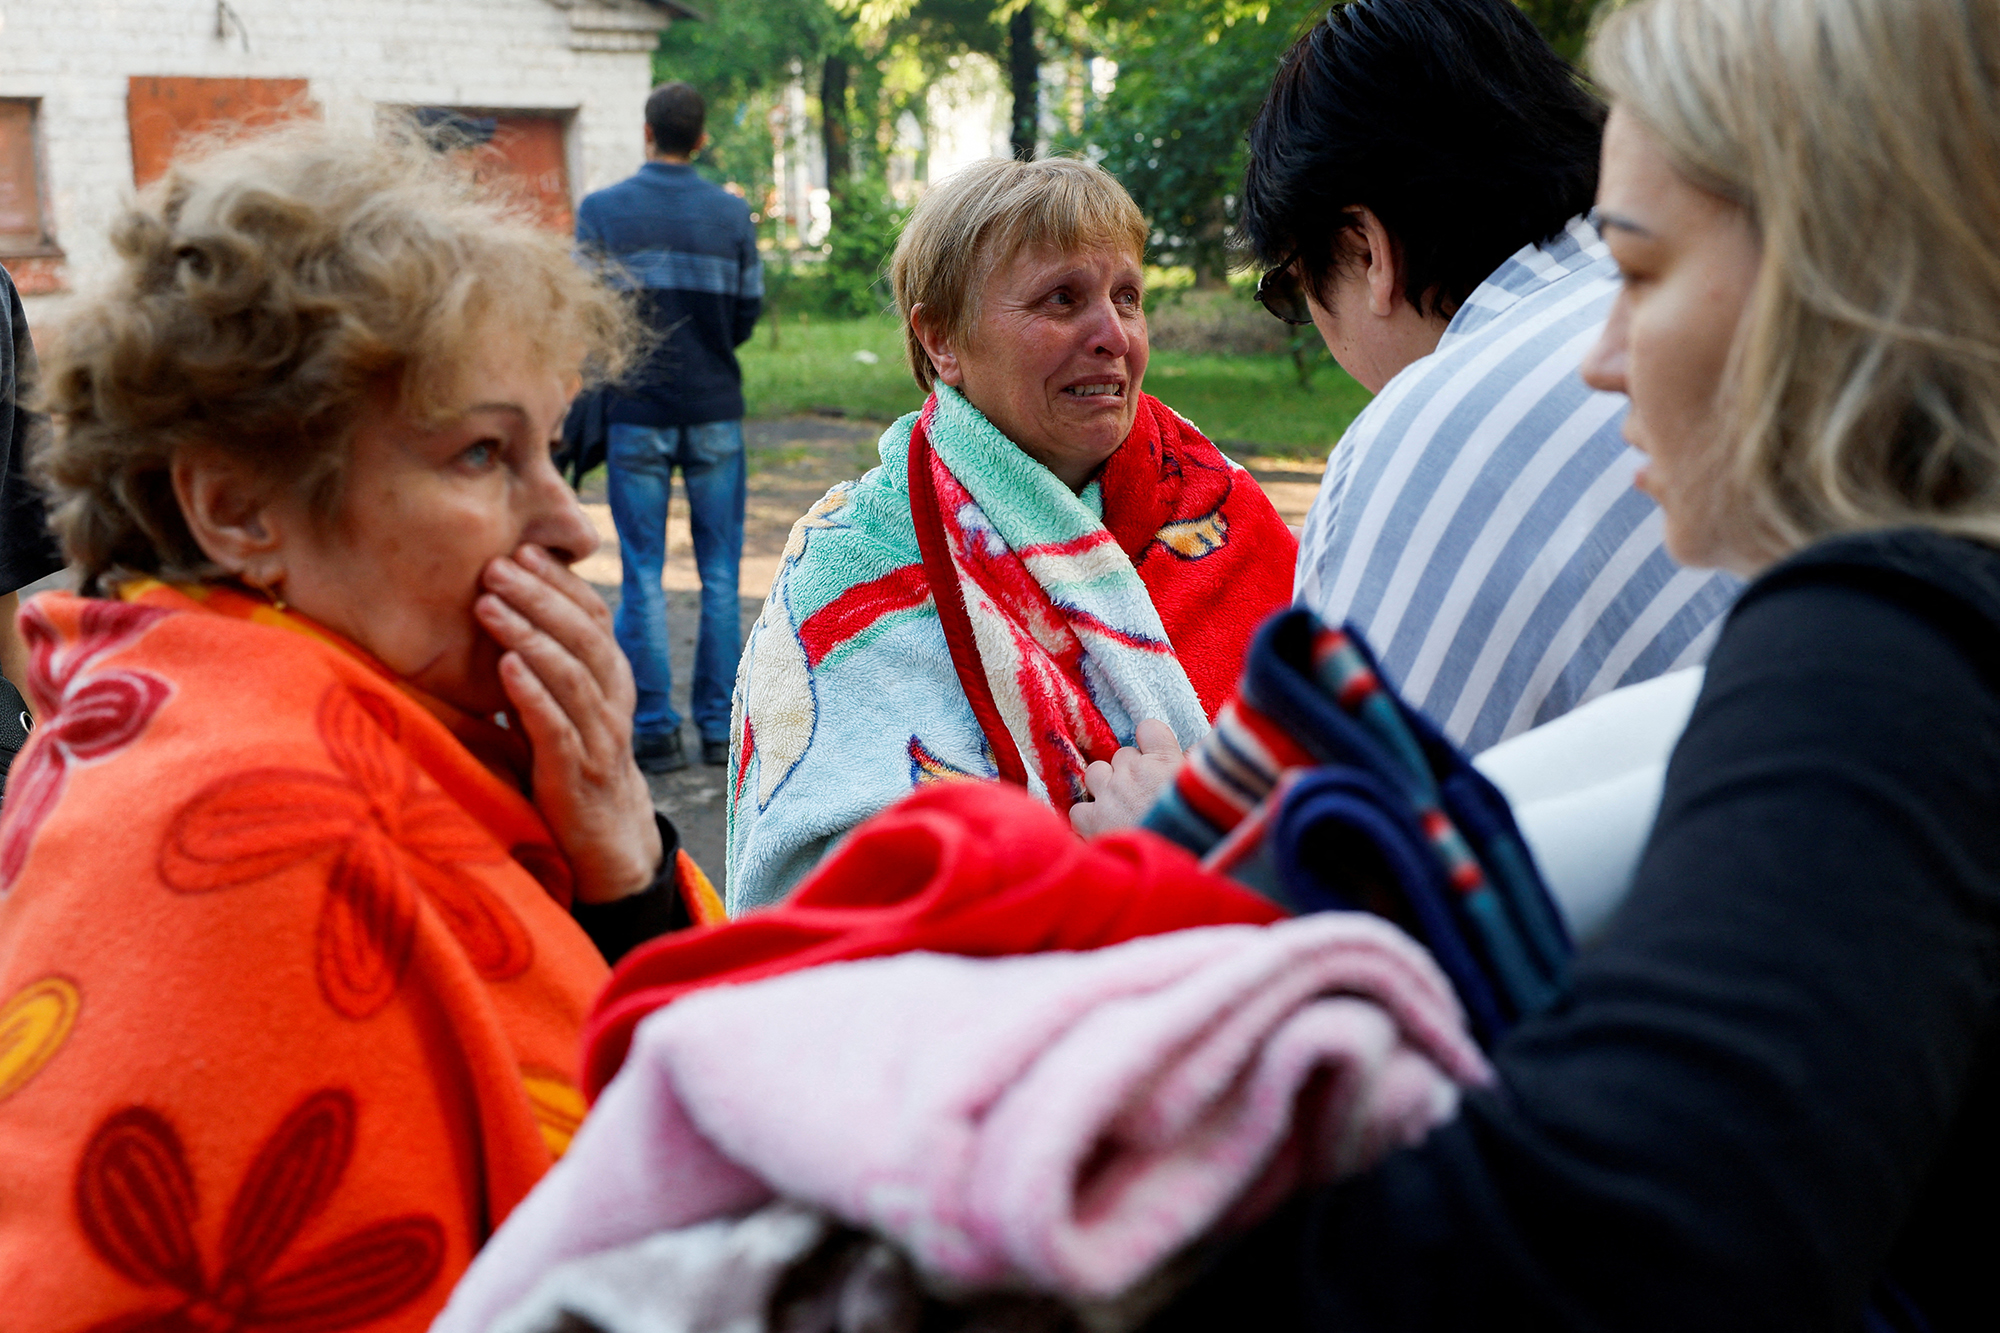 People react at a site of a residential building heavily damaged by a Russian missile strike in Kryvyi Rih, Dnipropetrovsk region, Ukraine, on June 13.